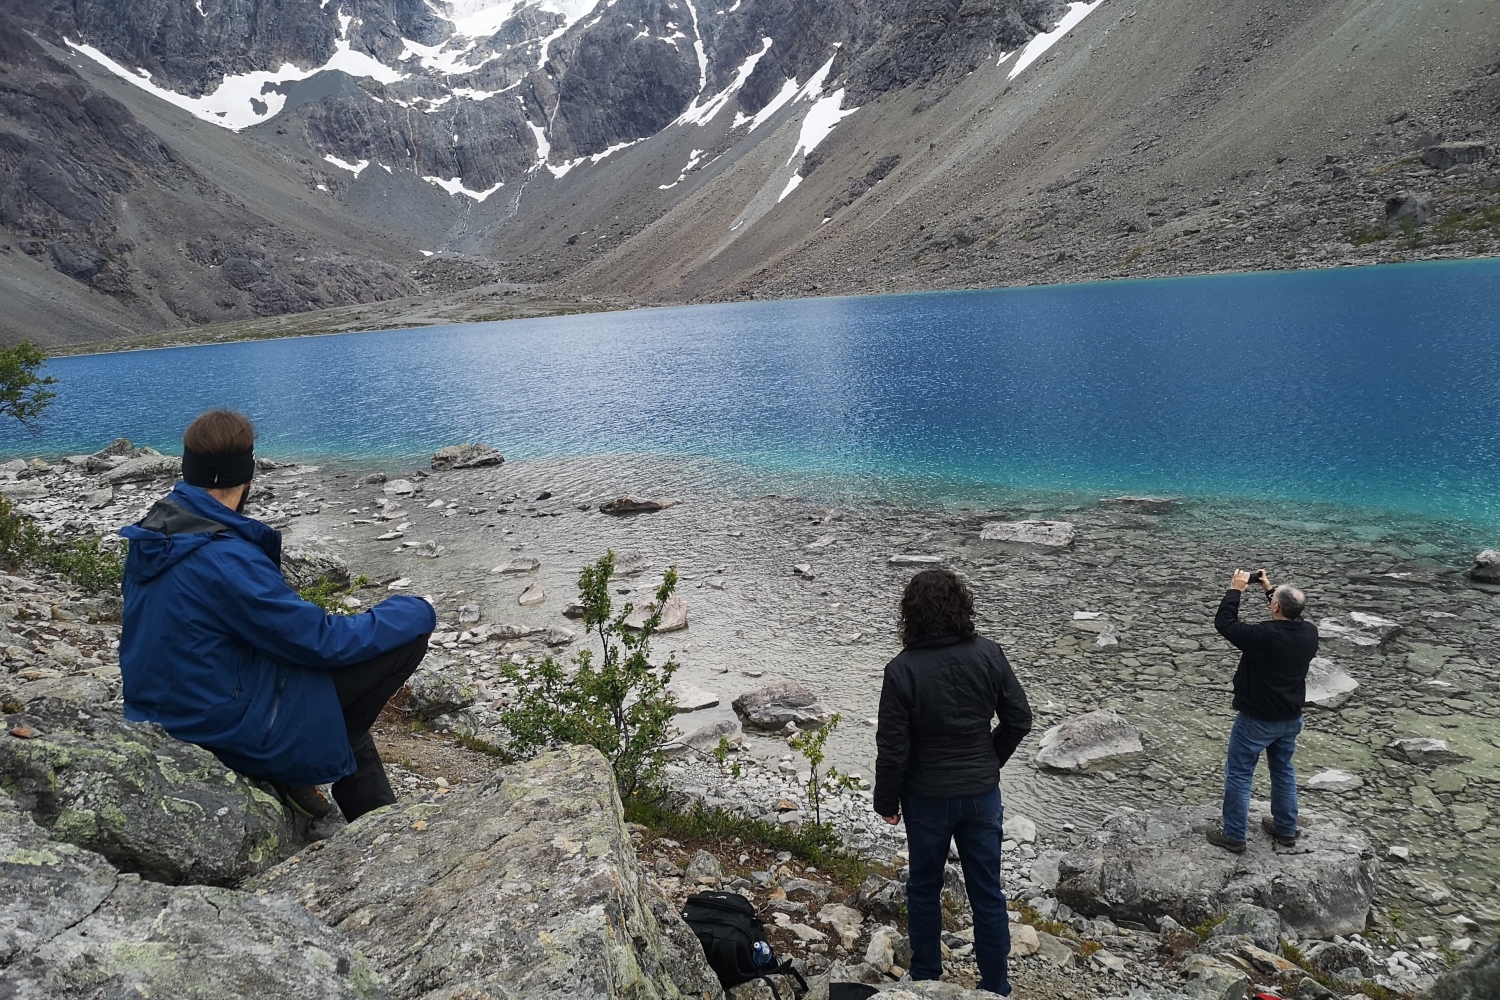 Hike to the Blue Lake for 1-6 guests, private